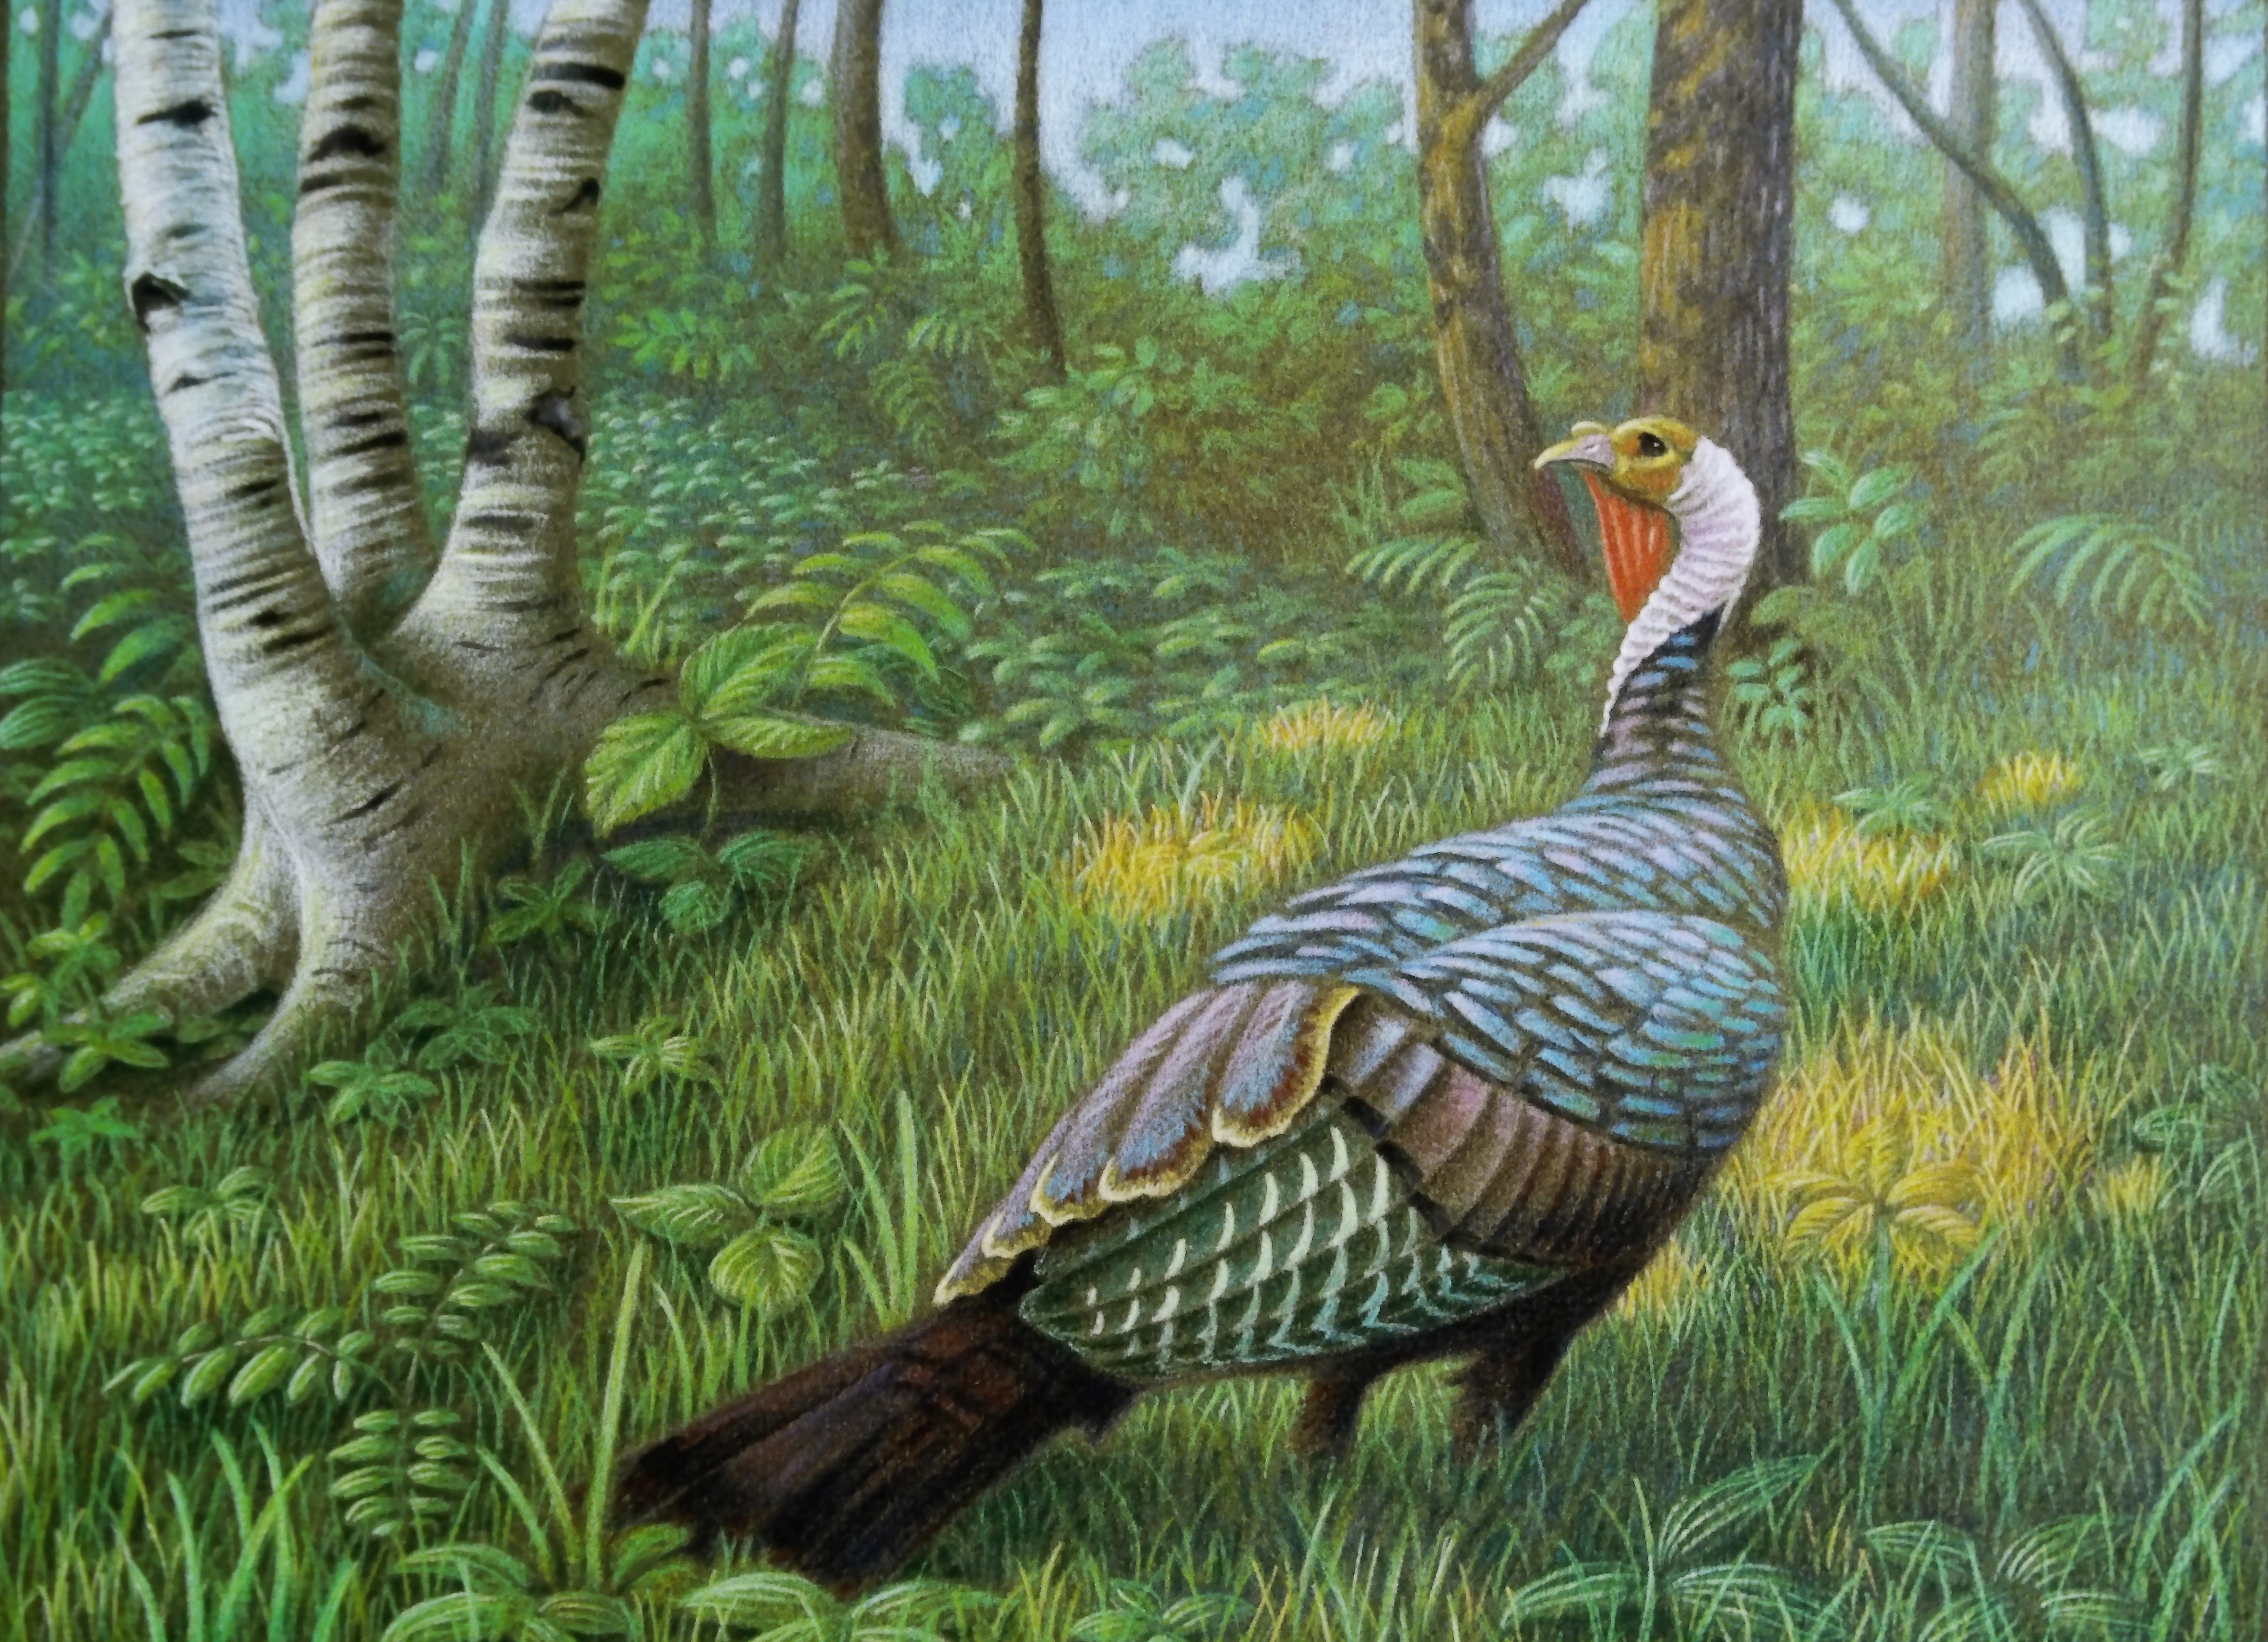 Colorful drawing of turkey standing in forest, surrounded by trees in green and yellow grasses and foliage